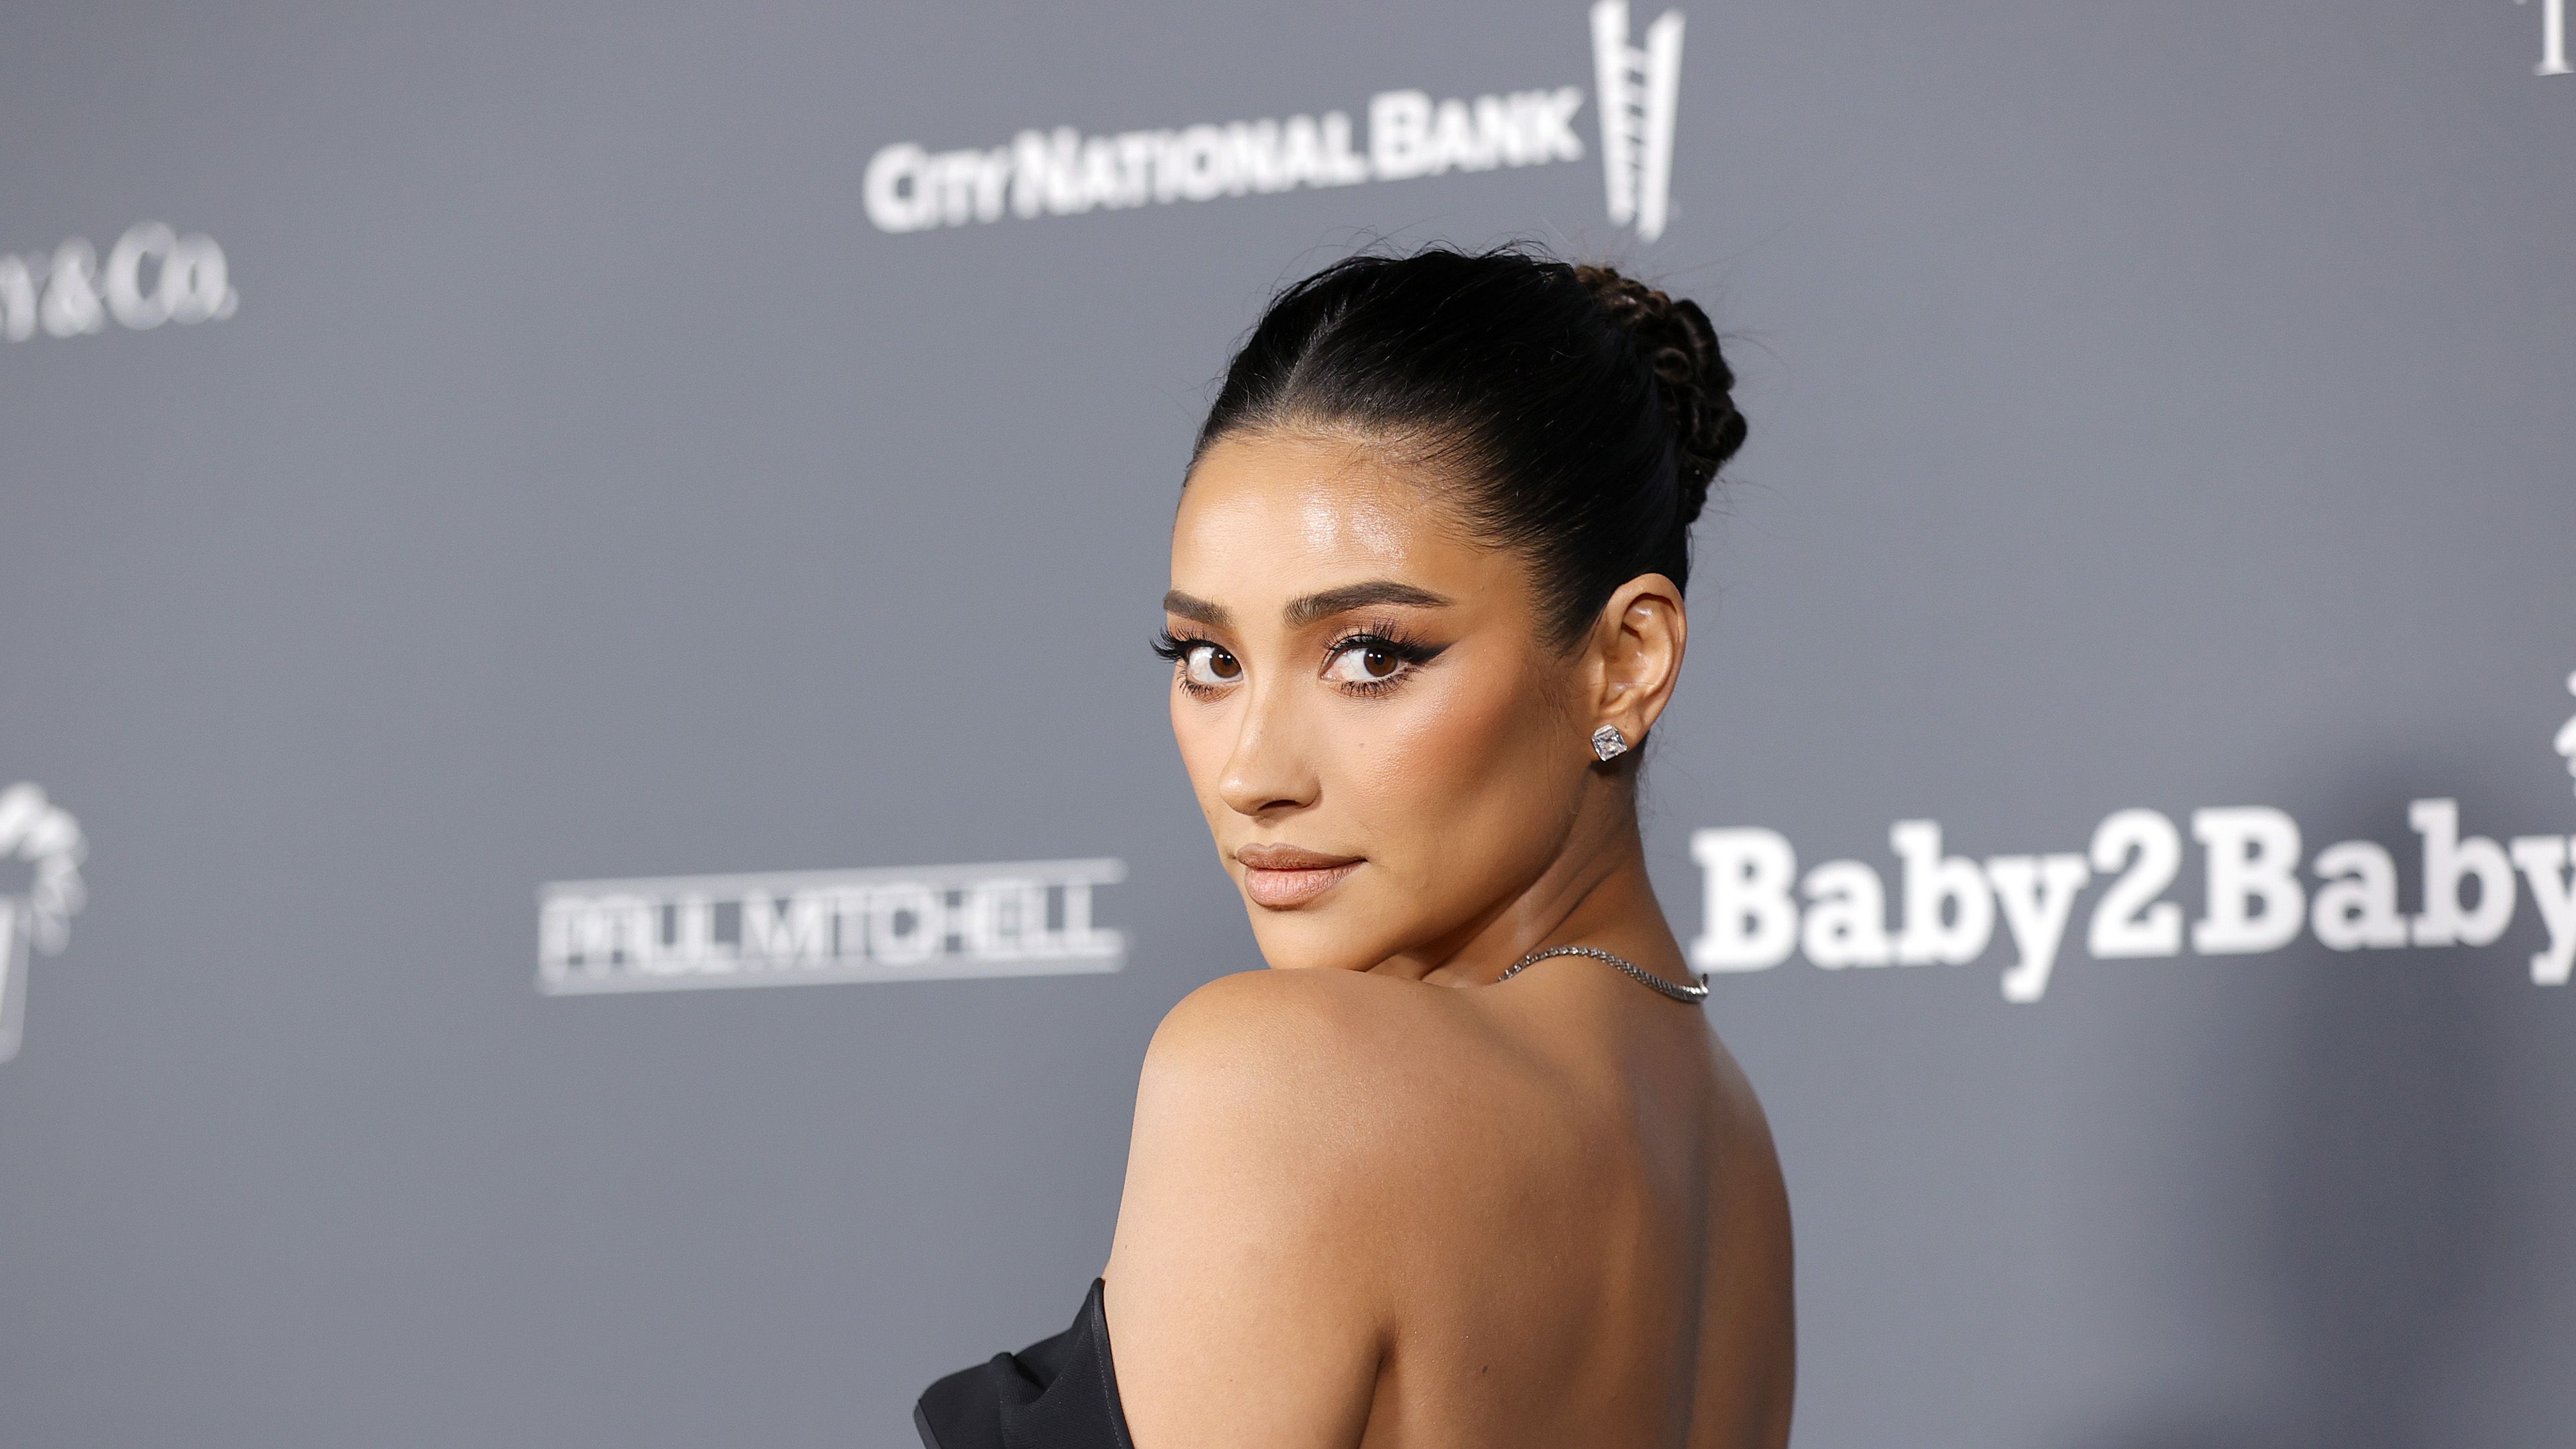 bret cornelius recommends shay mitchell nudes pic